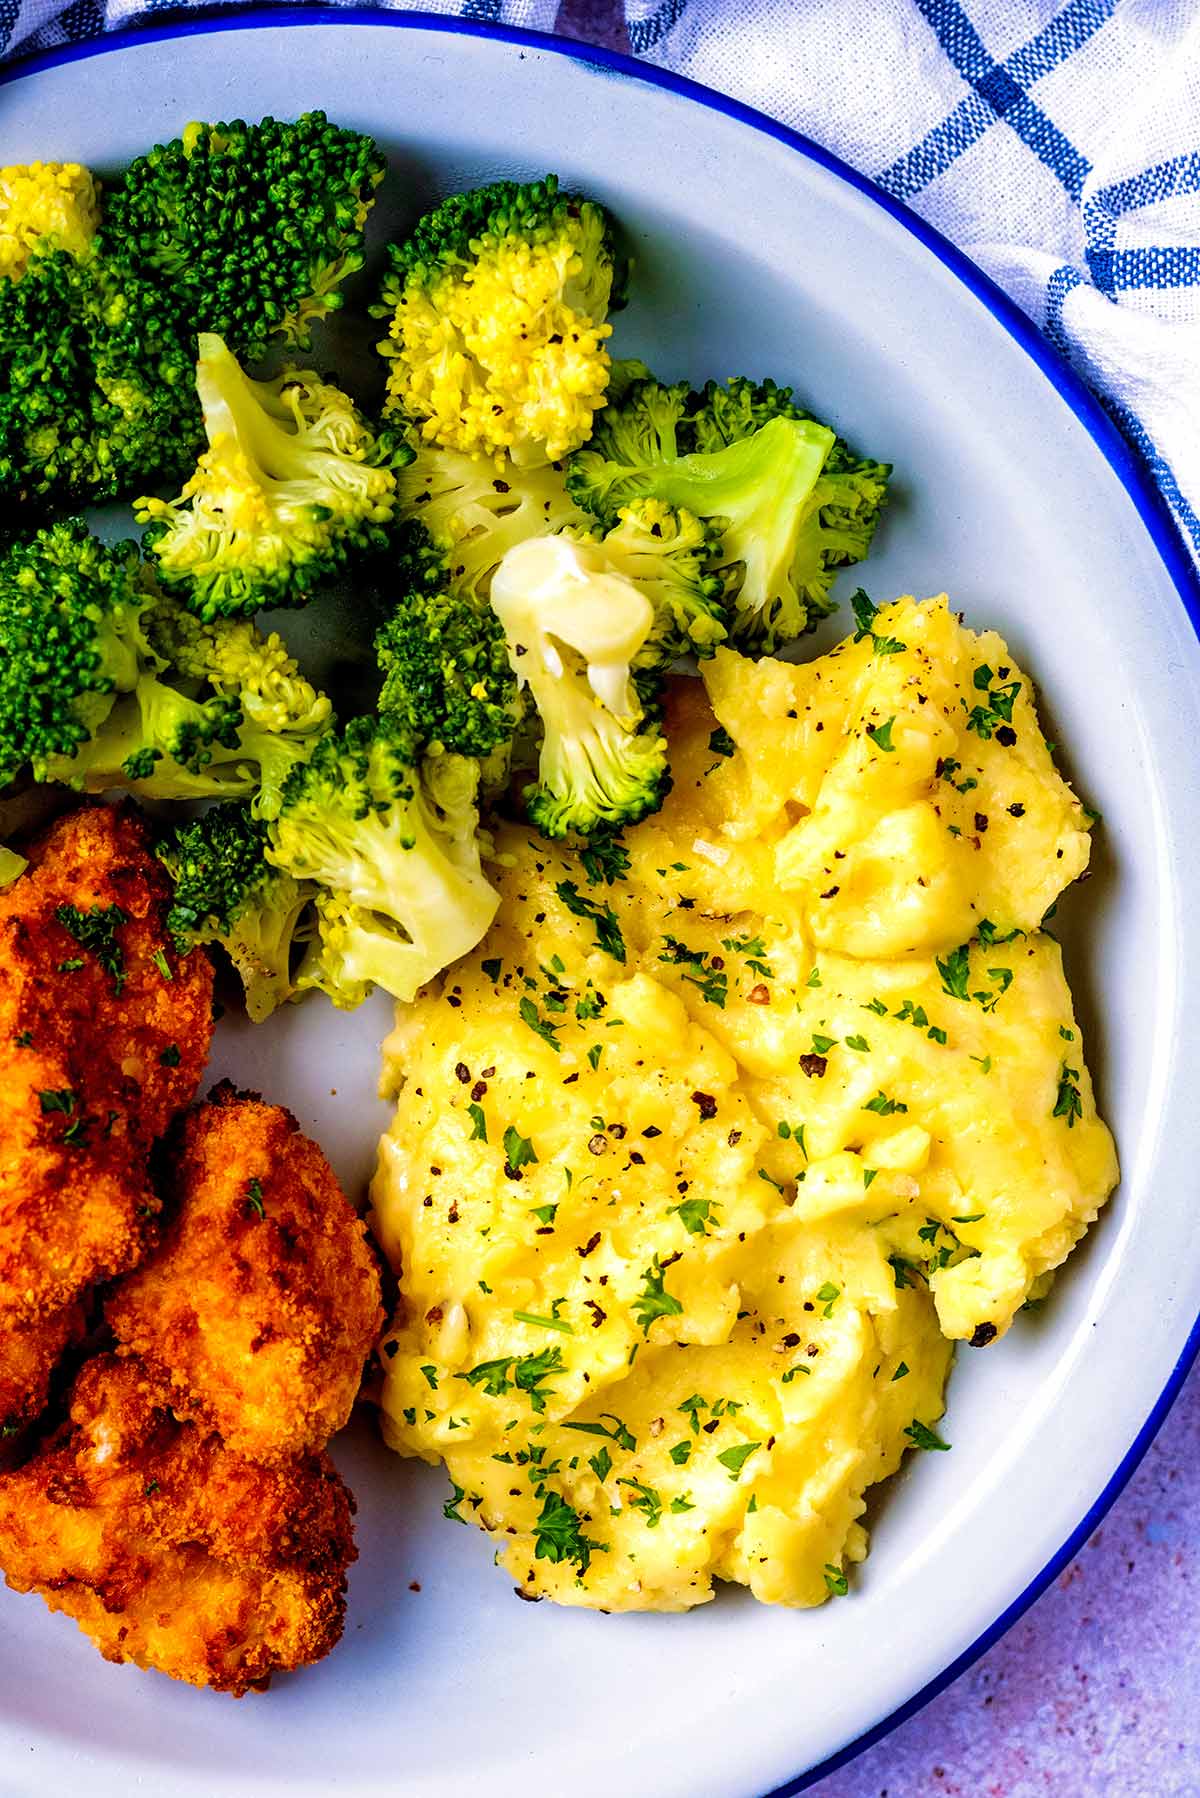 Mashed potato on a plate with broccoli and chicken nuggets.